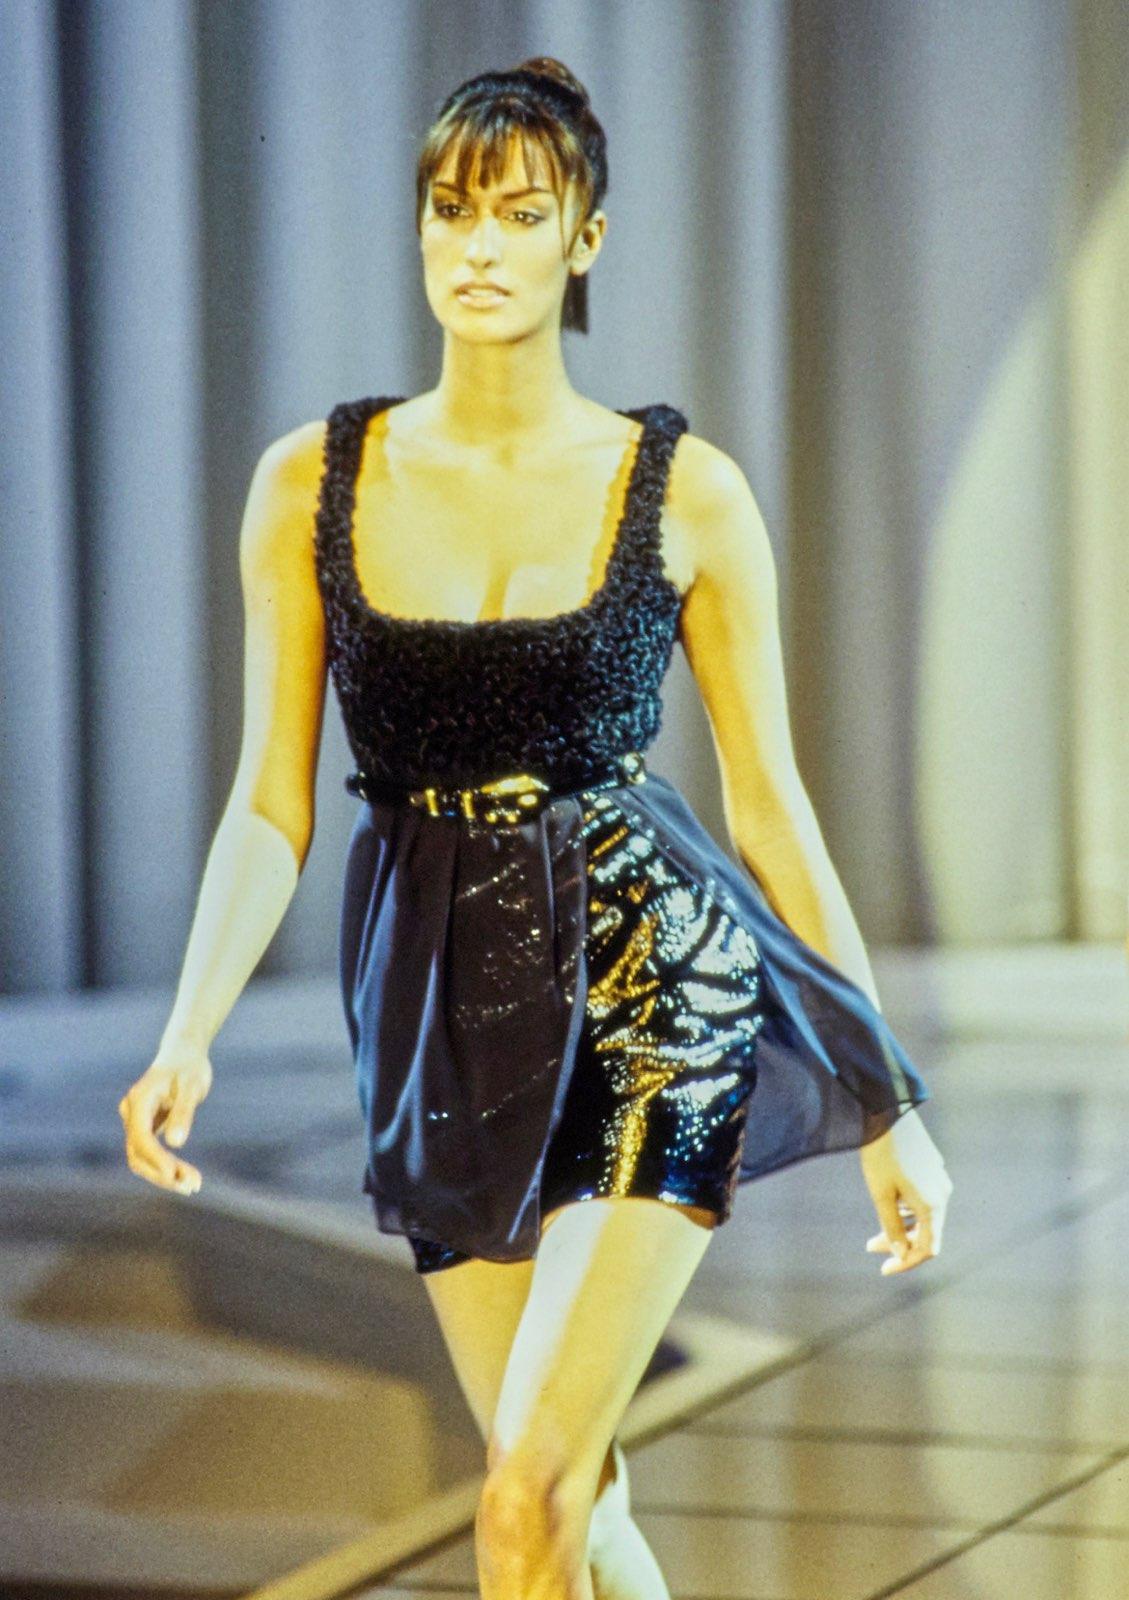 Presenting F/W 1994 Gianni Versace runway - a mix of playfully sexy and high-tech. An iteration of this dress designed by Gianni Versace was debuted as look 53 and was worn by Yasmeen Ghauri. This black dress comes across as a full ensemble made of